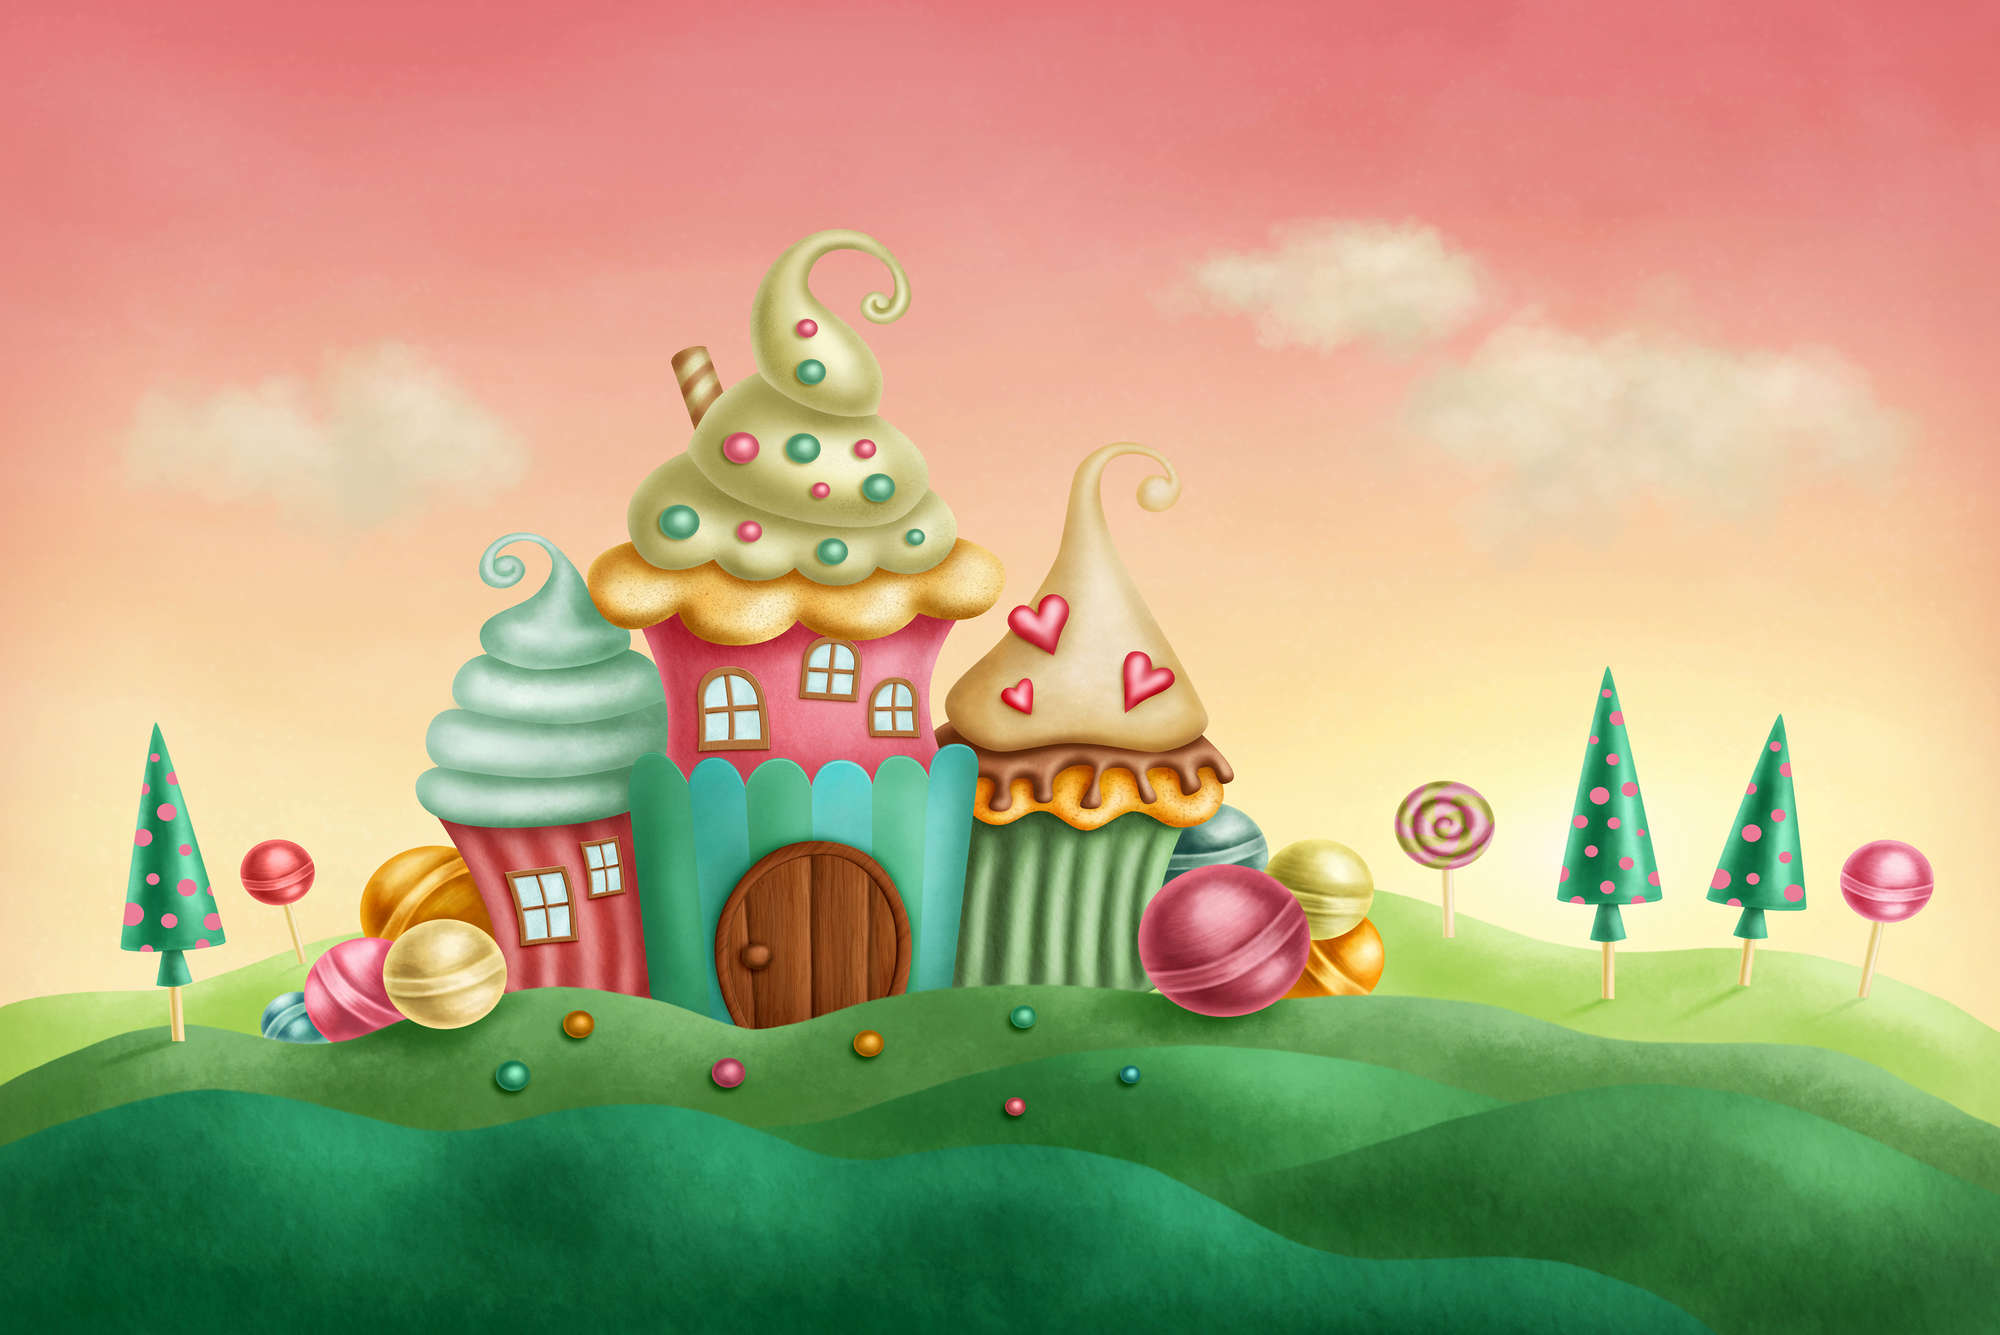             Children mural castle of sweets on textured non-woven
        